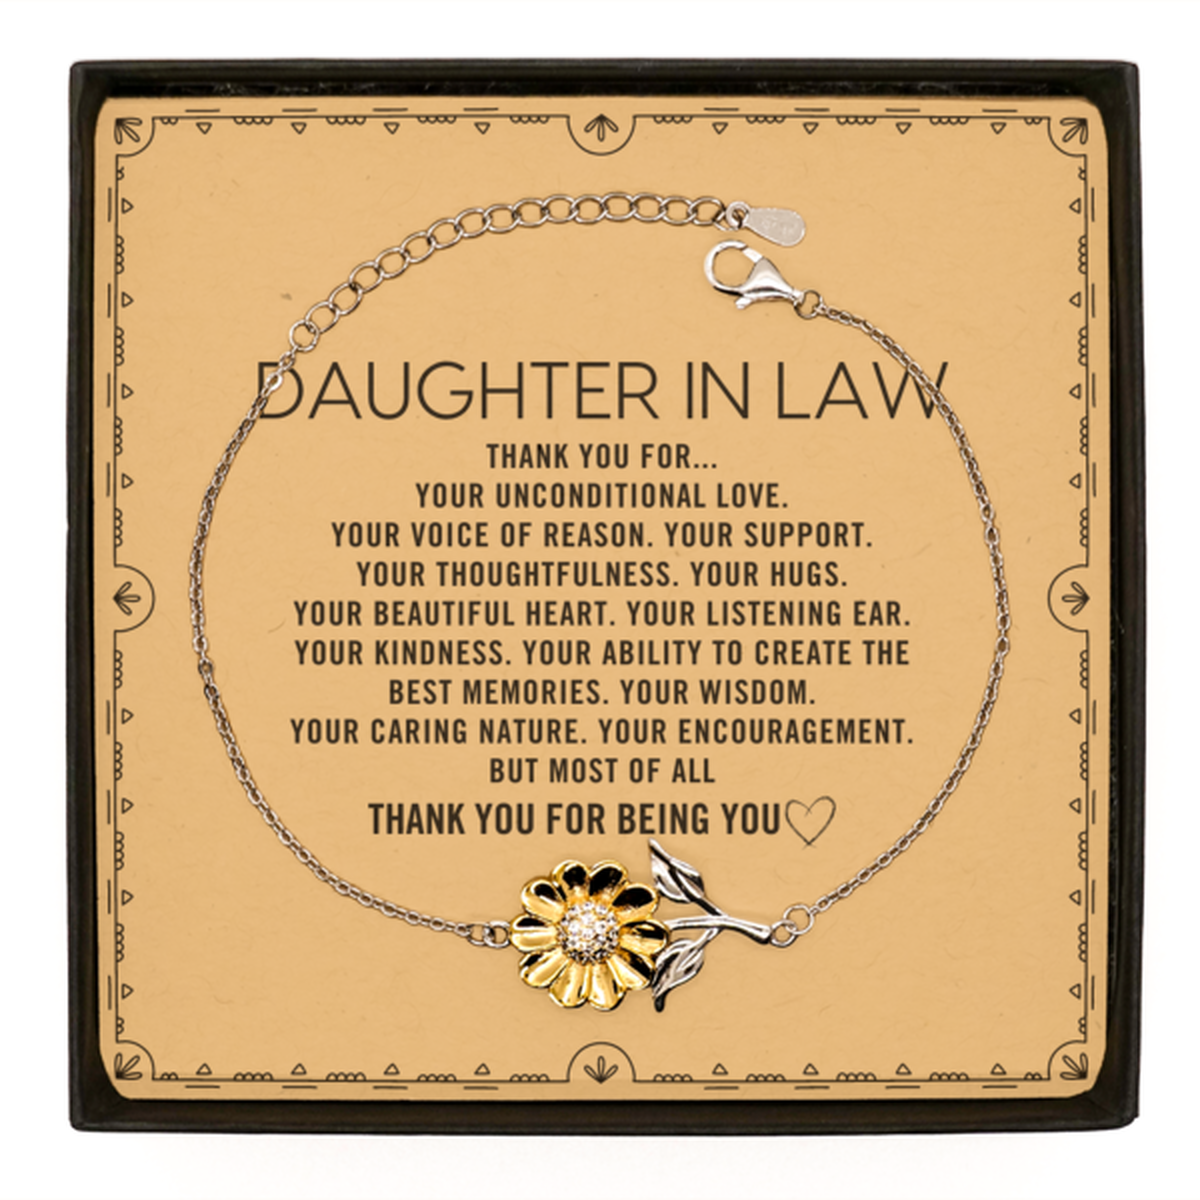 Daughter In Law Sunflower Bracelet Custom, Message Card Gifts For Daughter In Law Christmas Graduation Birthday Gifts for Men Women Daughter In Law Thank you for Your unconditional love